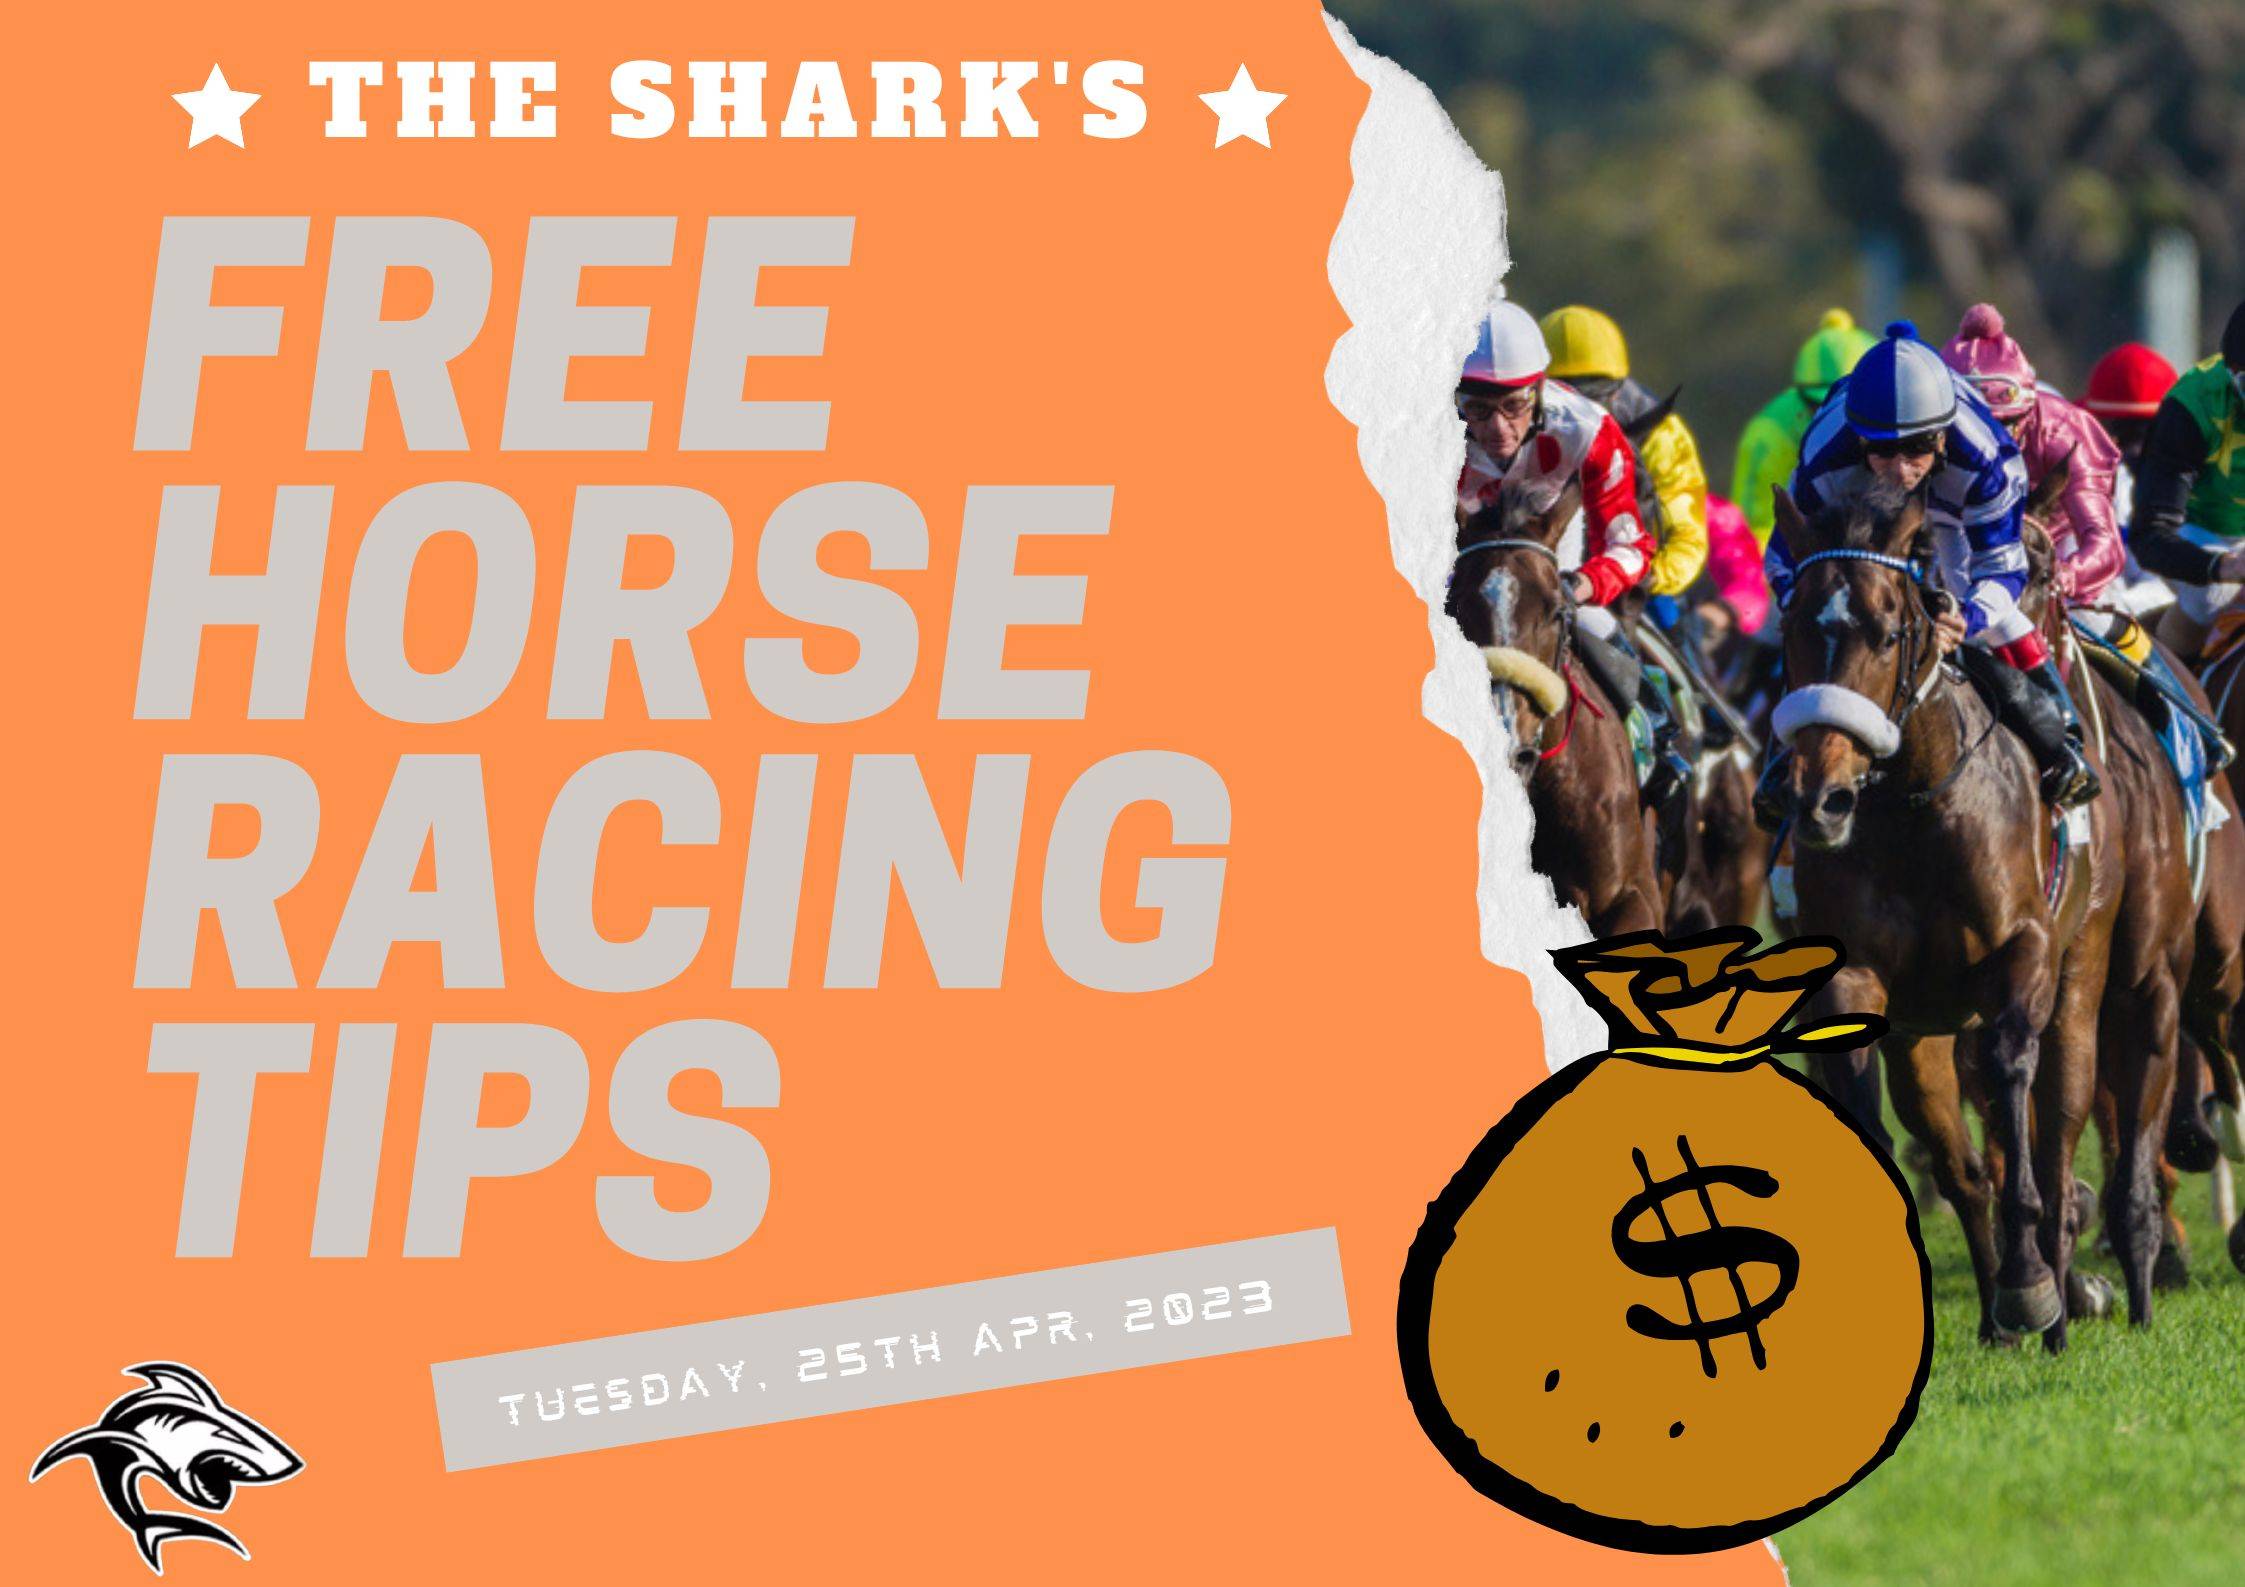 Free Horse Racing Tips - 25th Apr